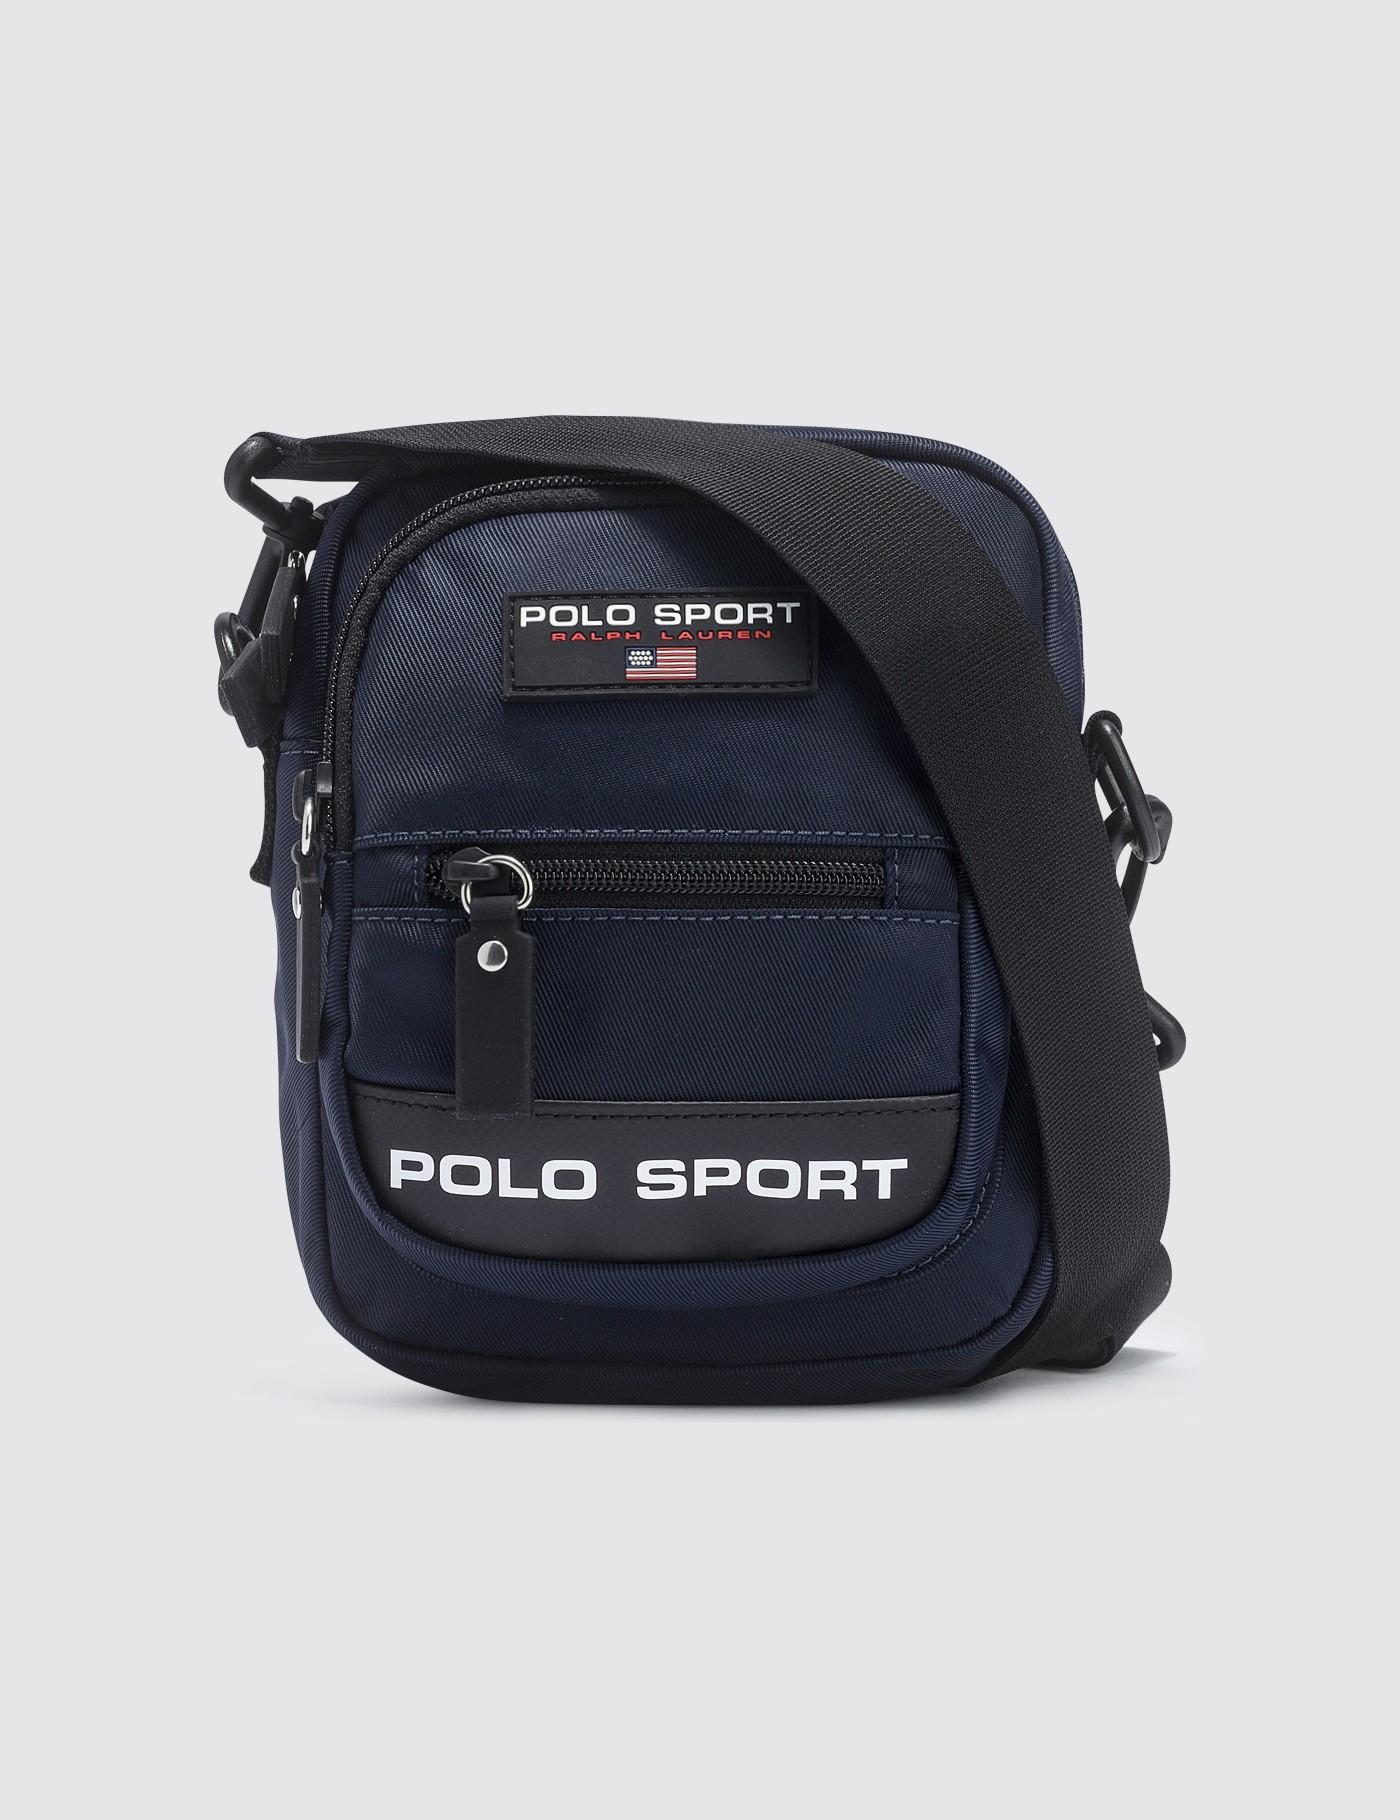 Polo Ralph Lauren Synthetic Polo Sport Bag in Blue for Men - Lyst